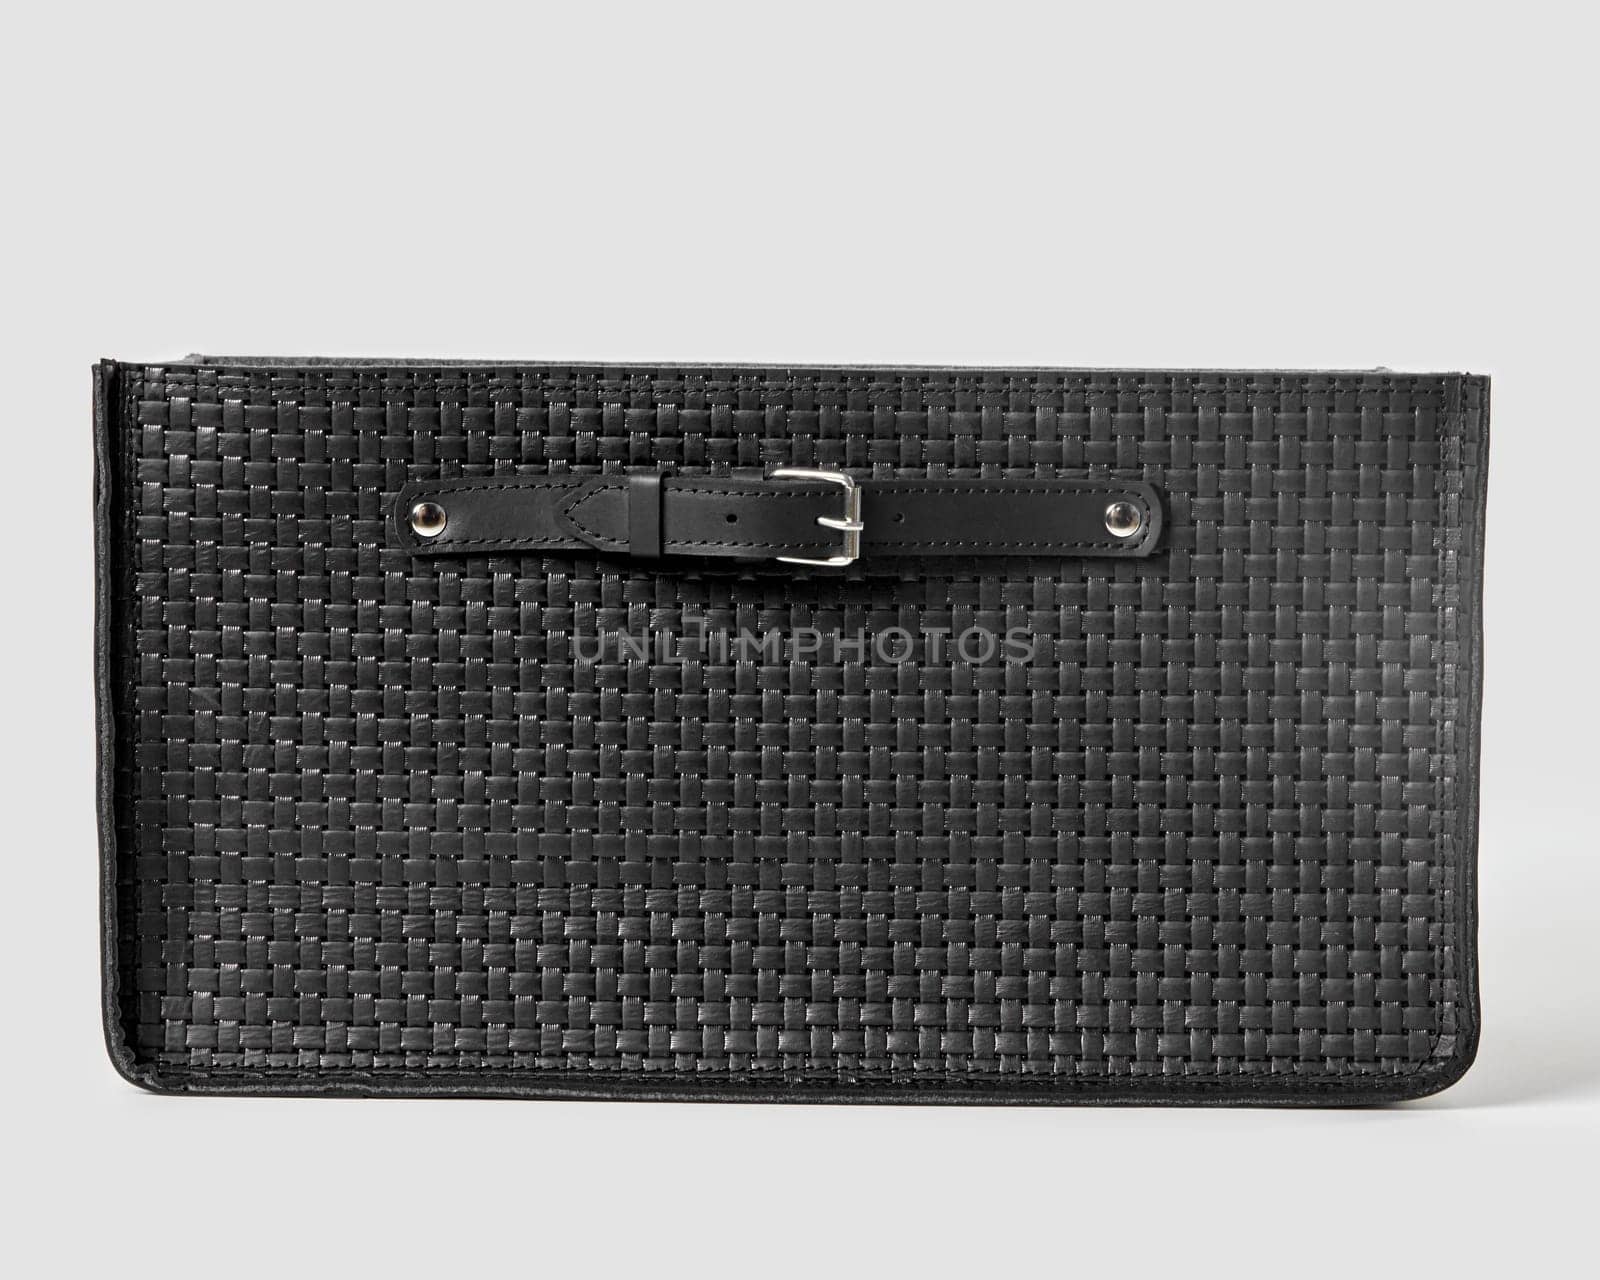 Front view of functional black woven leather storage box with sturdy build and convenient applied handles for stylish organization of space. Modern artisanal accessory for interior design